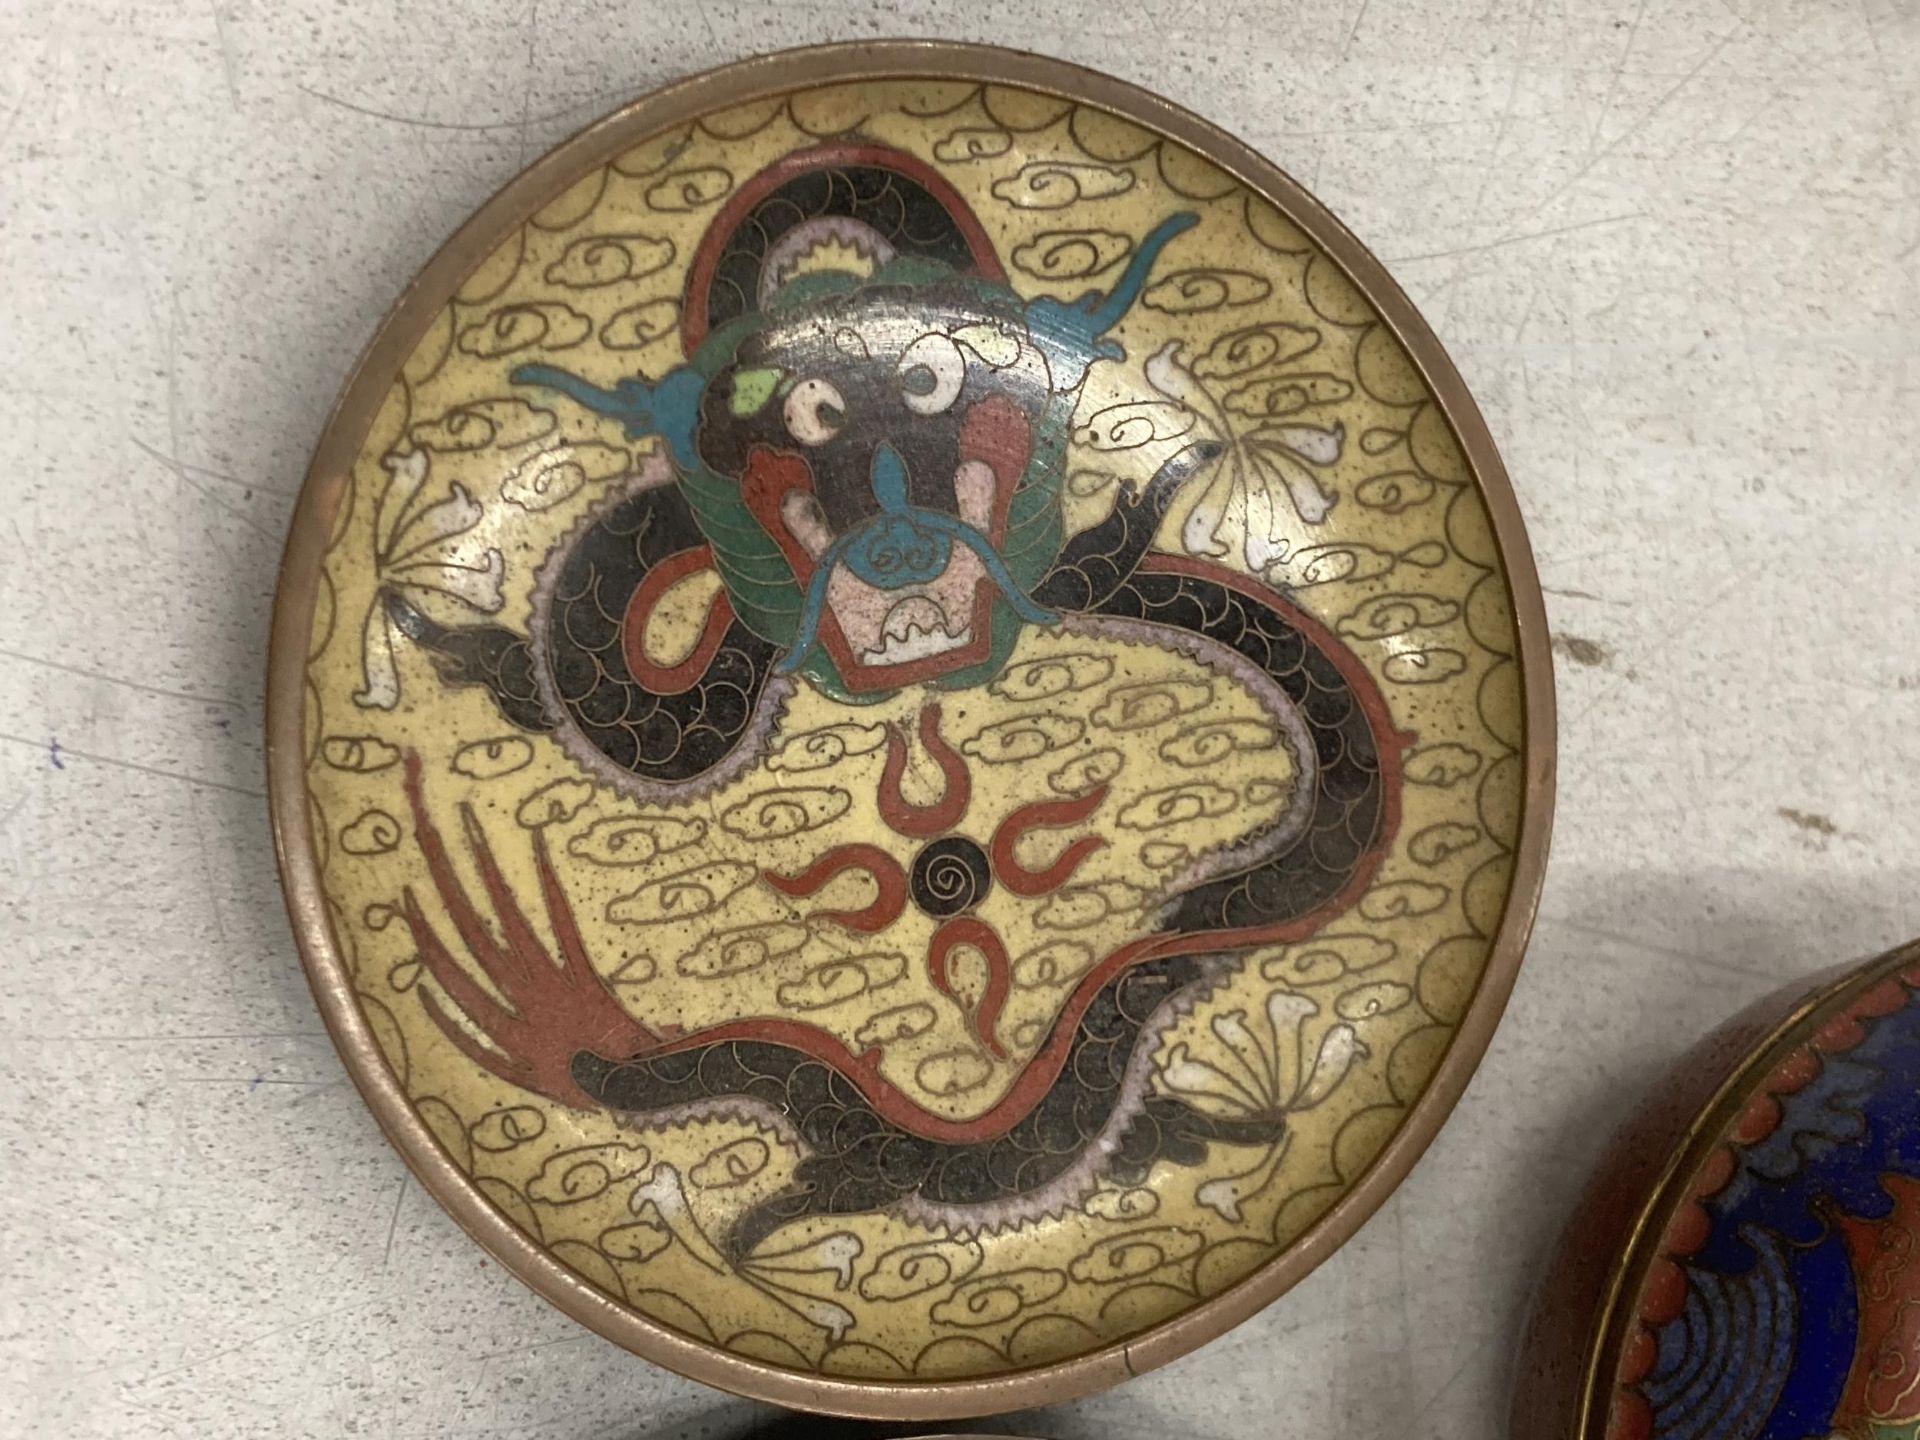 THREE CLOISONNE ITEMS WITH DRAGON DETAIL TO INCLUDE TWO PIN TRAYS AND A TRINKET BOX - Image 2 of 4